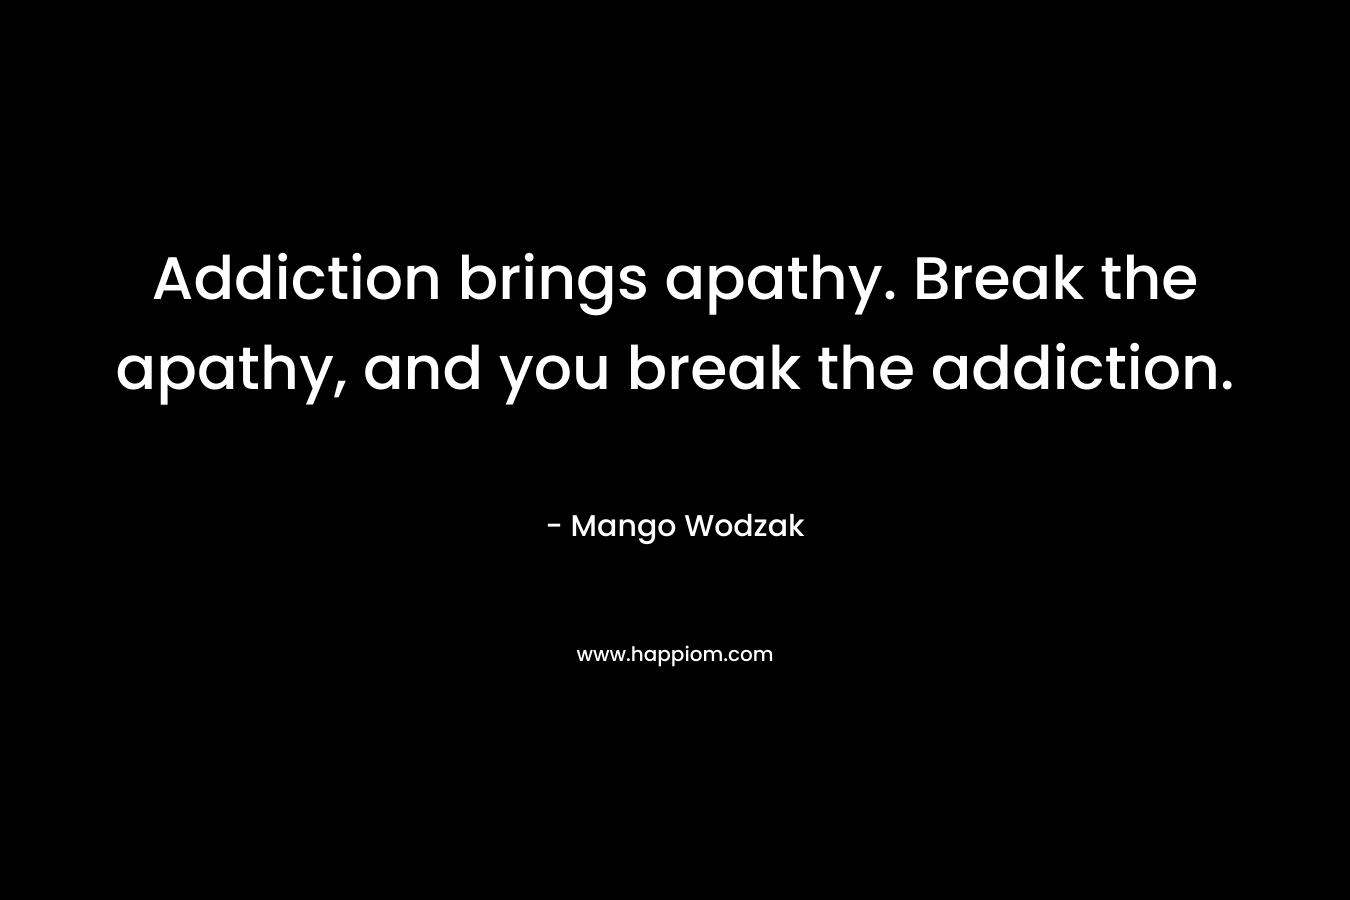 Addiction brings apathy. Break the apathy, and you break the addiction.